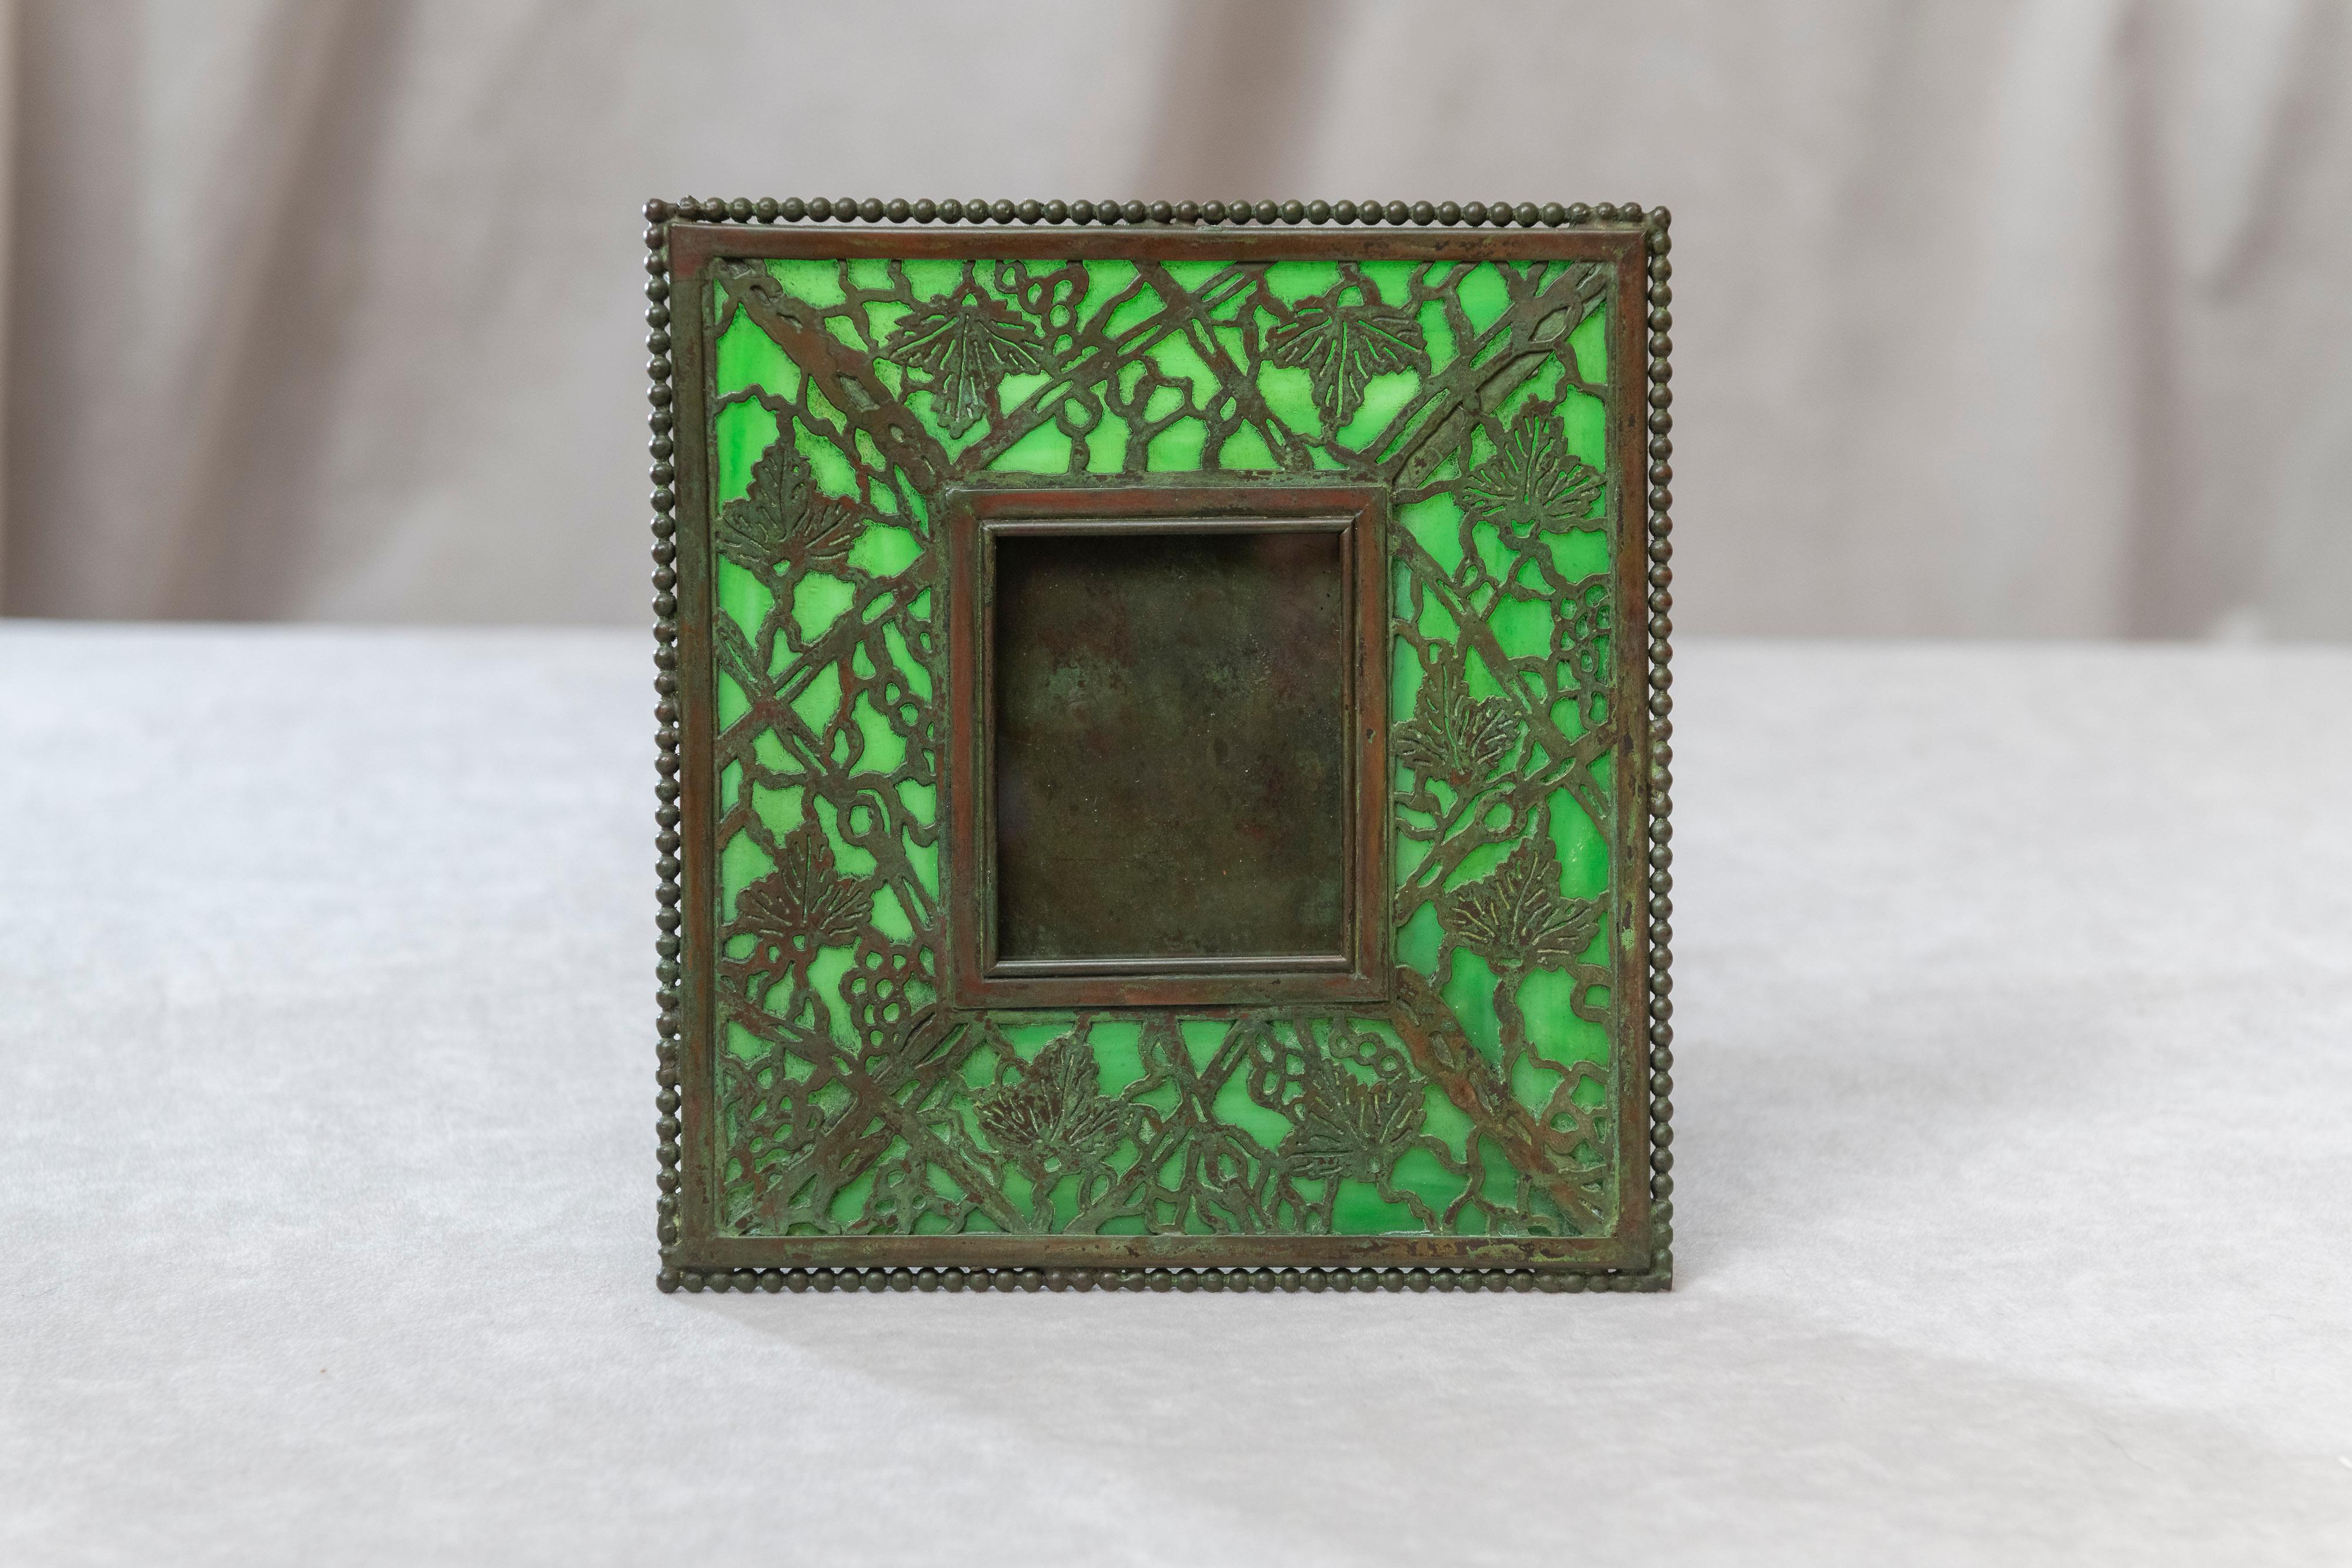 This smaller example of Tiffany's typical picture frame is a fine example of the genius of the man. Done in the grapevine pattern with green glass and finished in a rich warm patination to the metal. A lovely choice frame that can be fitted in most